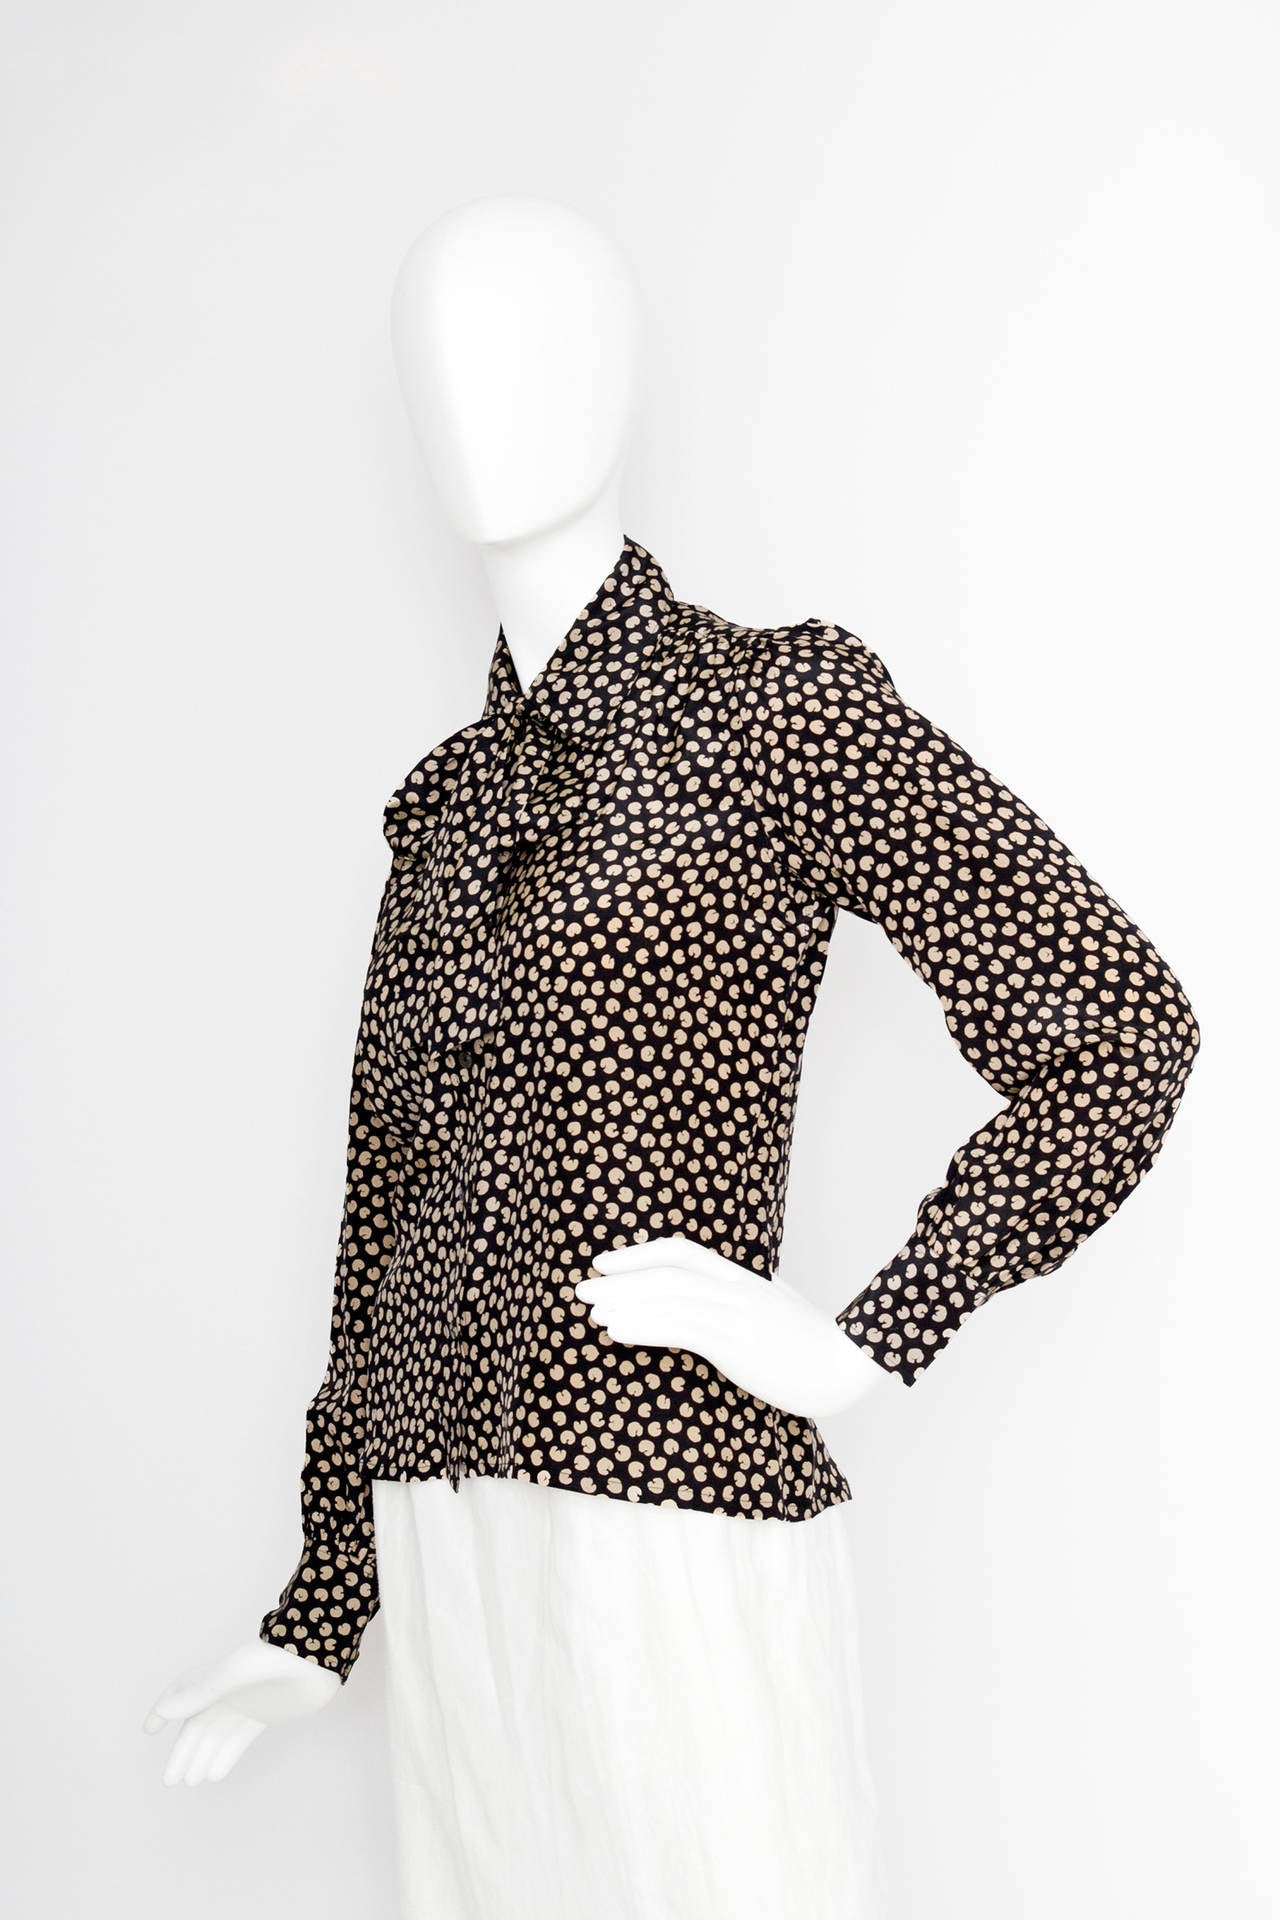 A 1970s black Yves Saint Laurent silk shirt with a pussy bow detail, one buttoned cuffs, a front button closure and an all over abstract print.

The shirt is equivalent to a modern size Small.